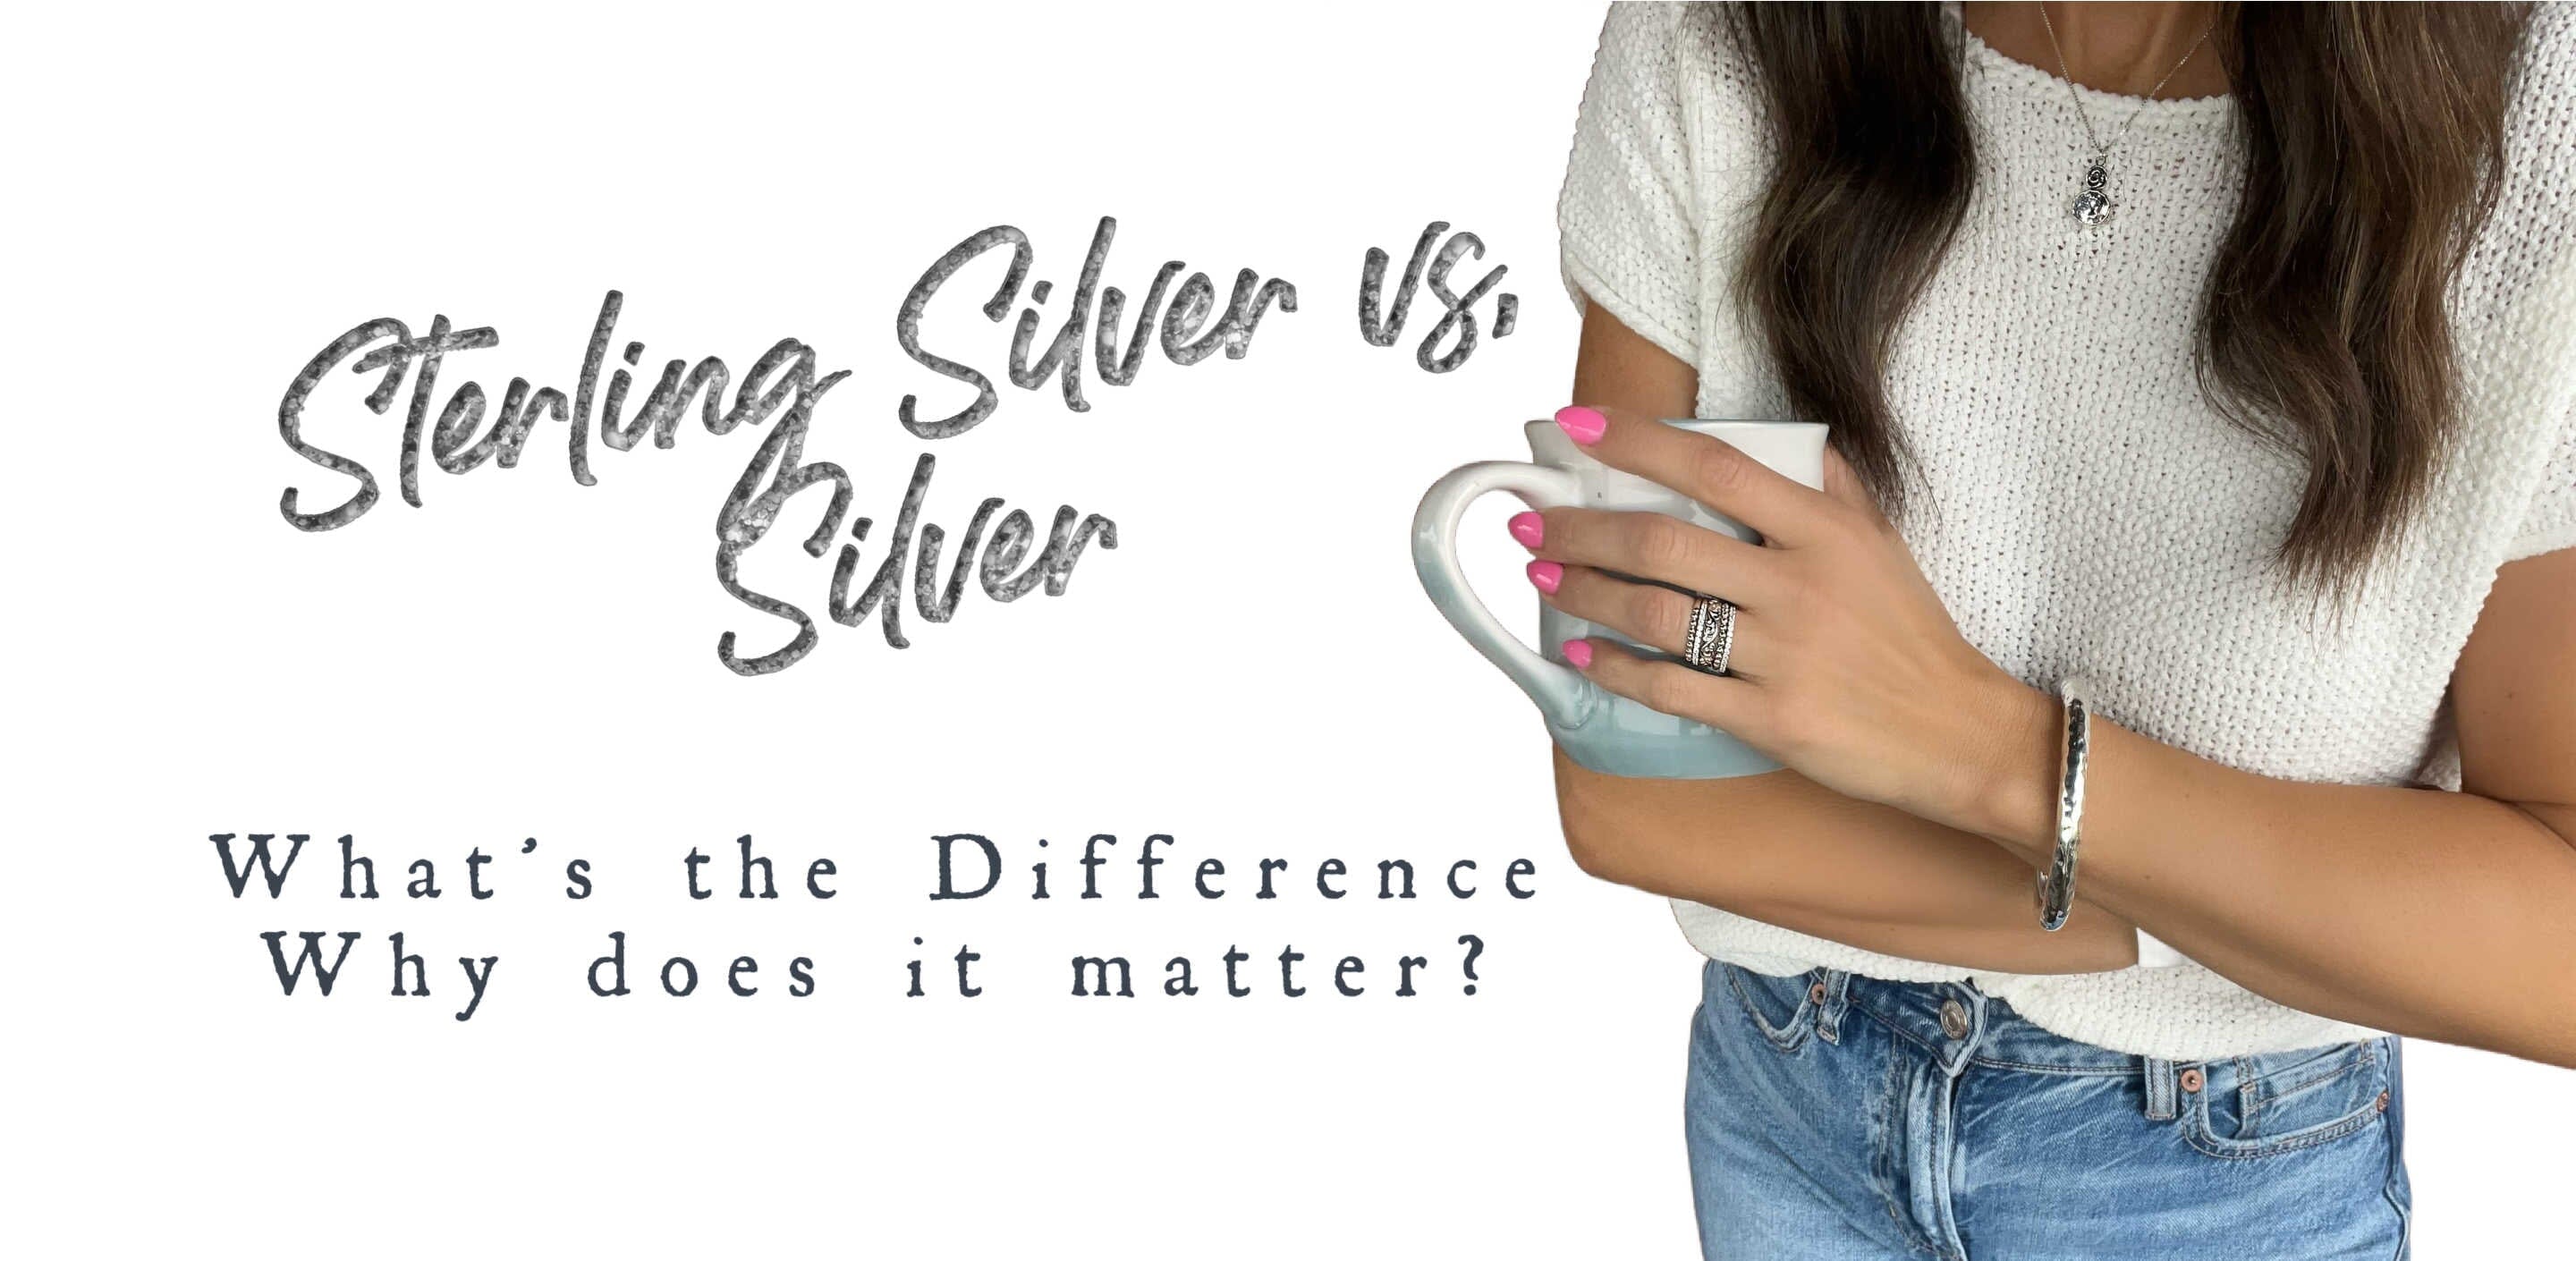 What is sterling silver jewelry and how is it different from "silver" jewelry?